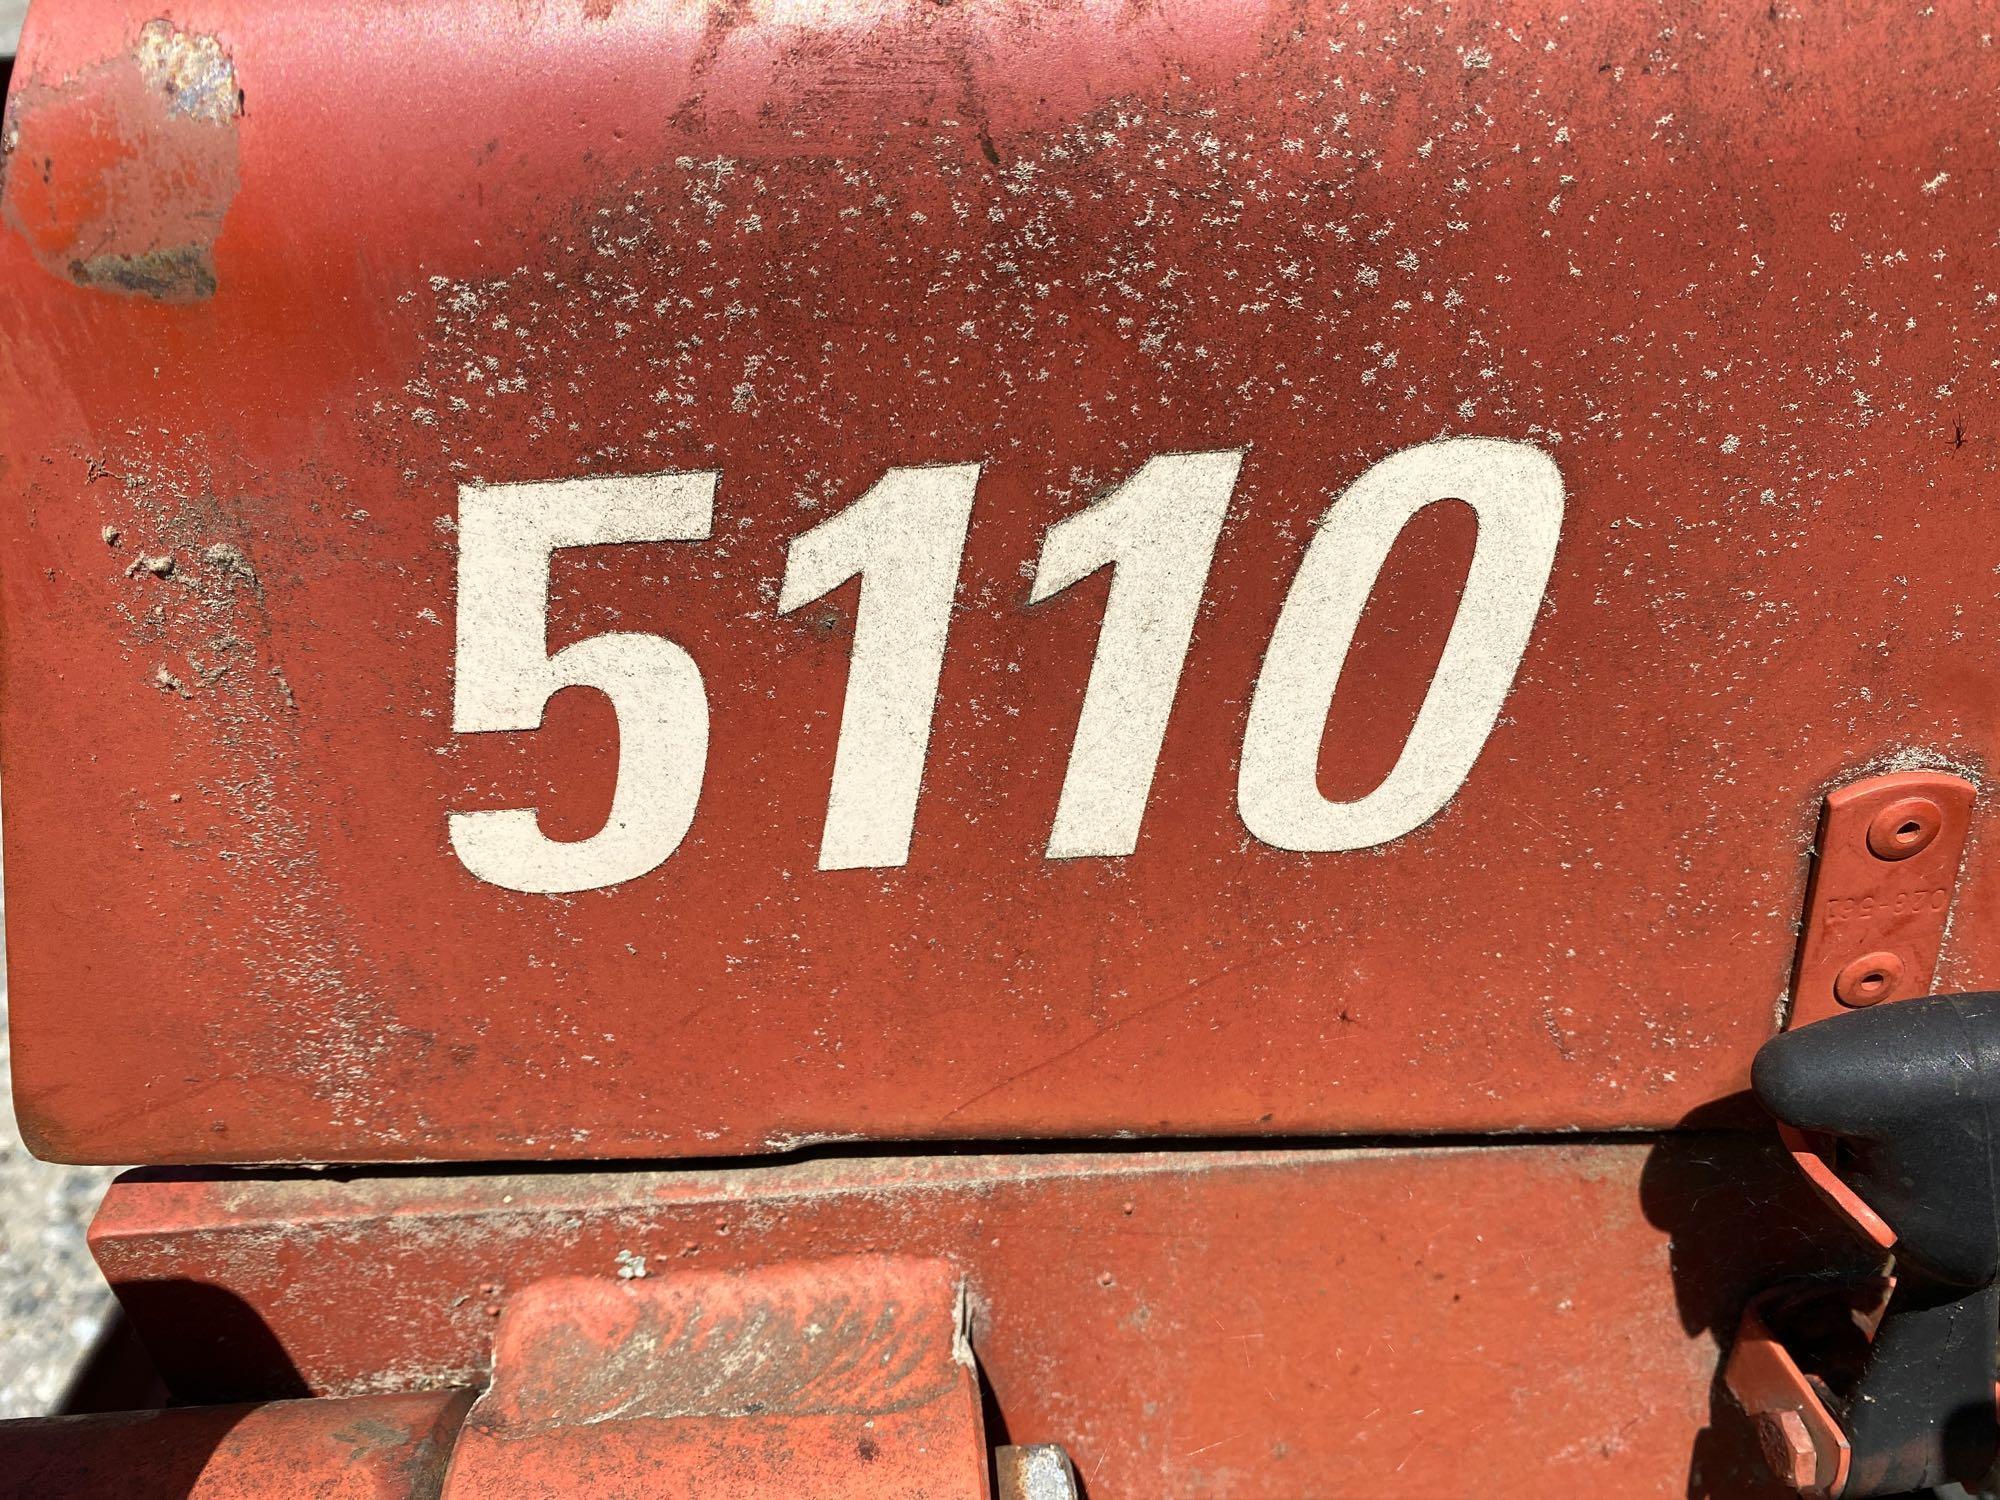 1997 Ditch Witch Trencher 5110